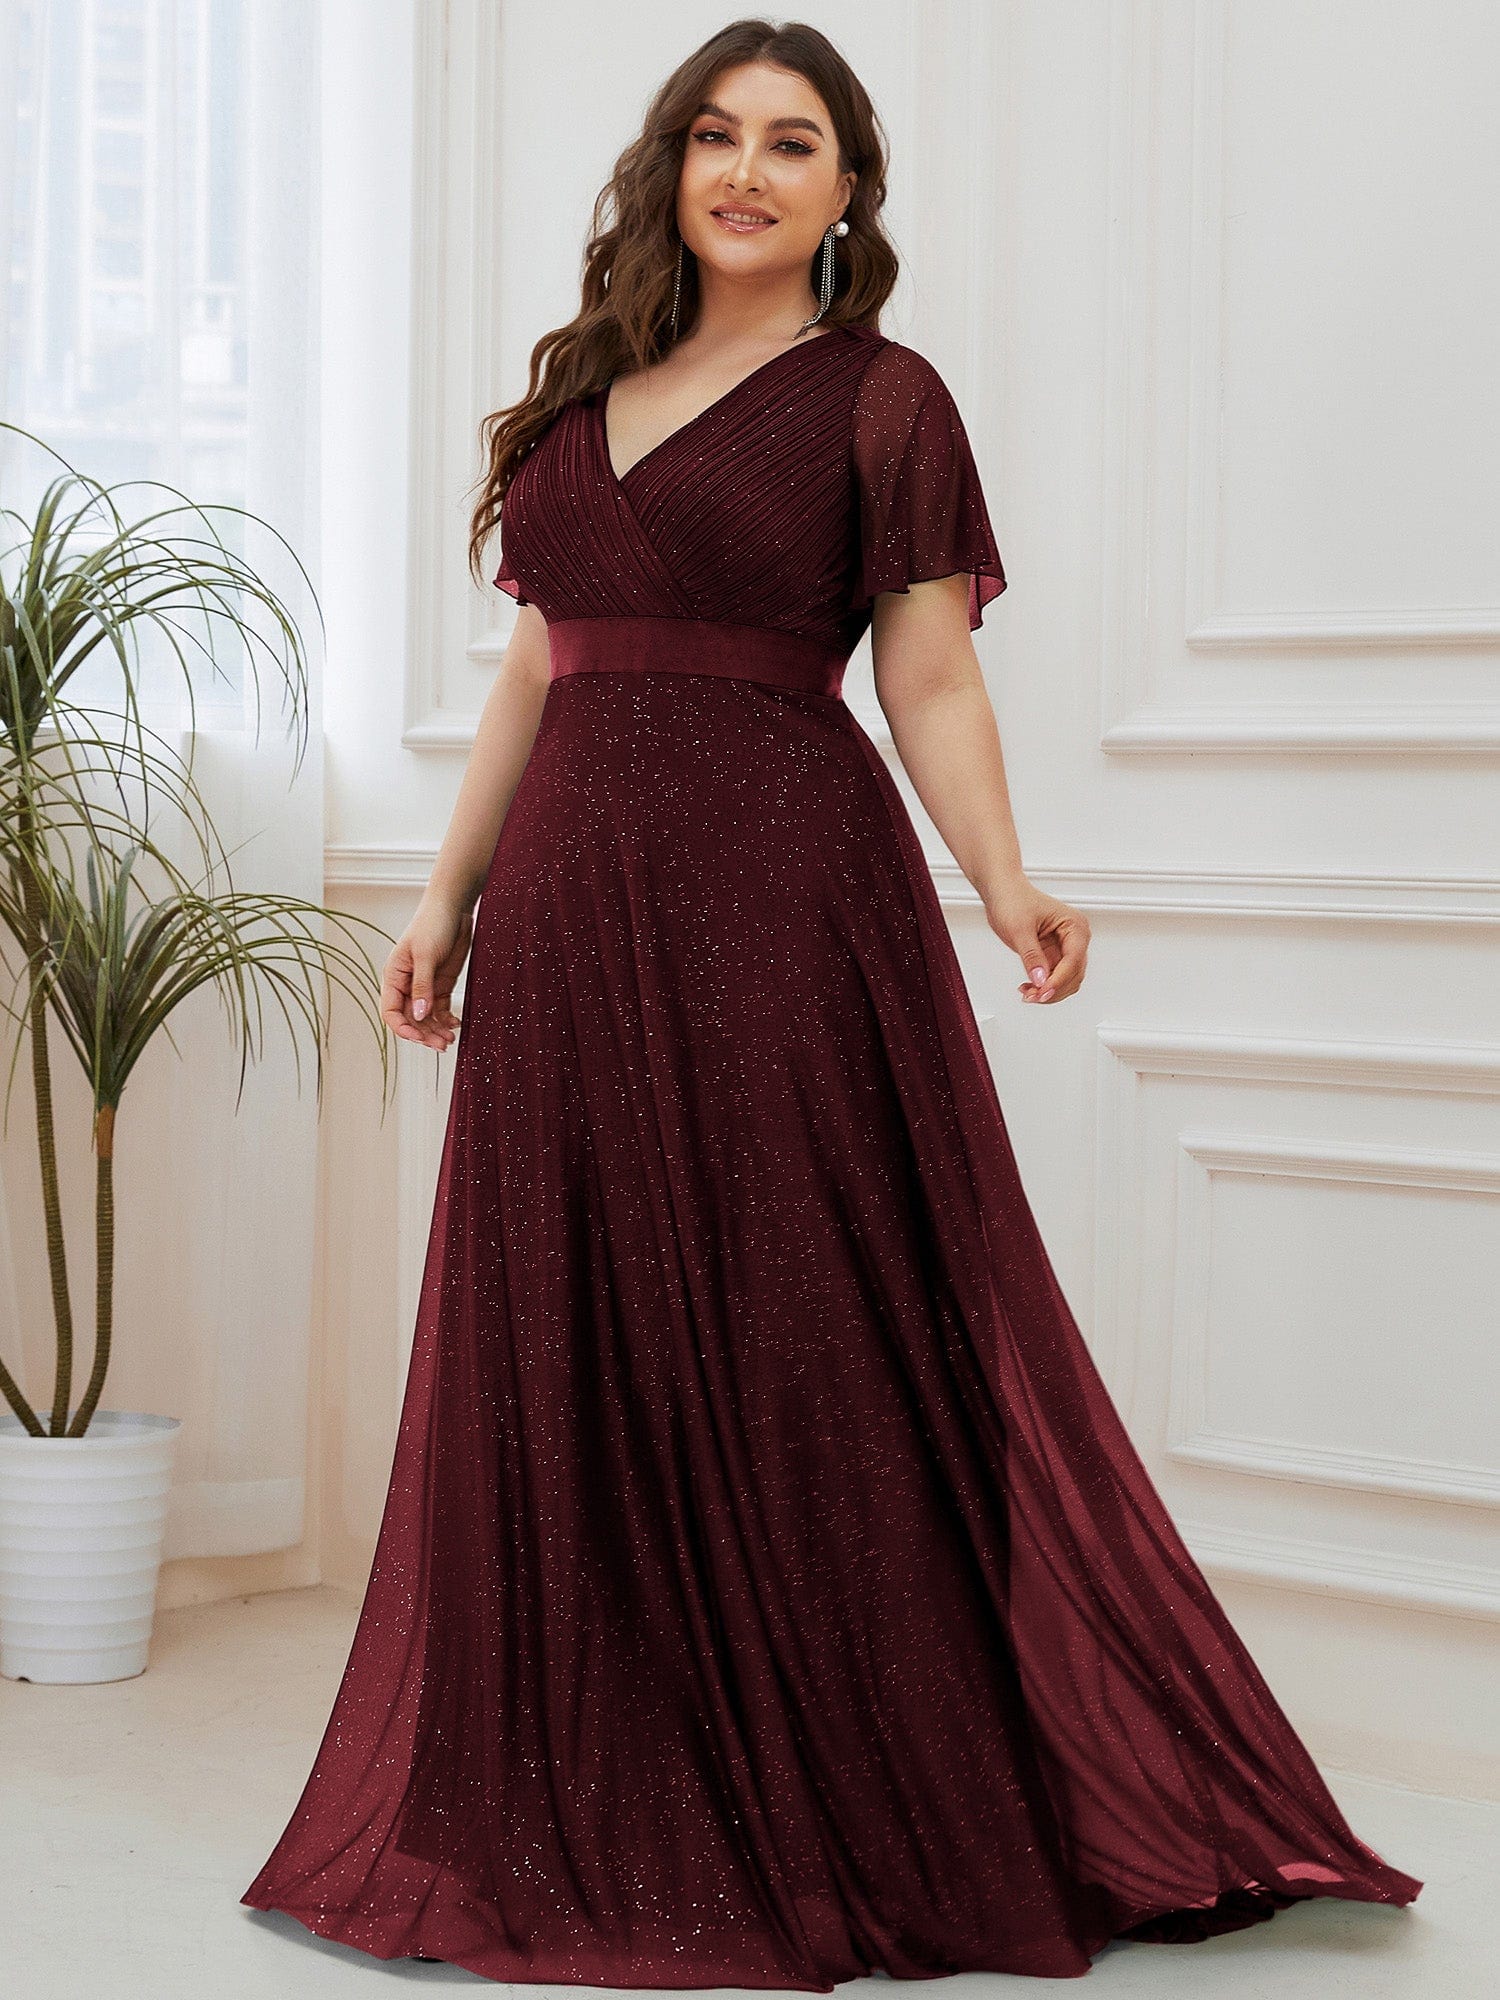 Plus Size Formal Dresses & Gowns, Size 16-26 - Ever-Pretty US